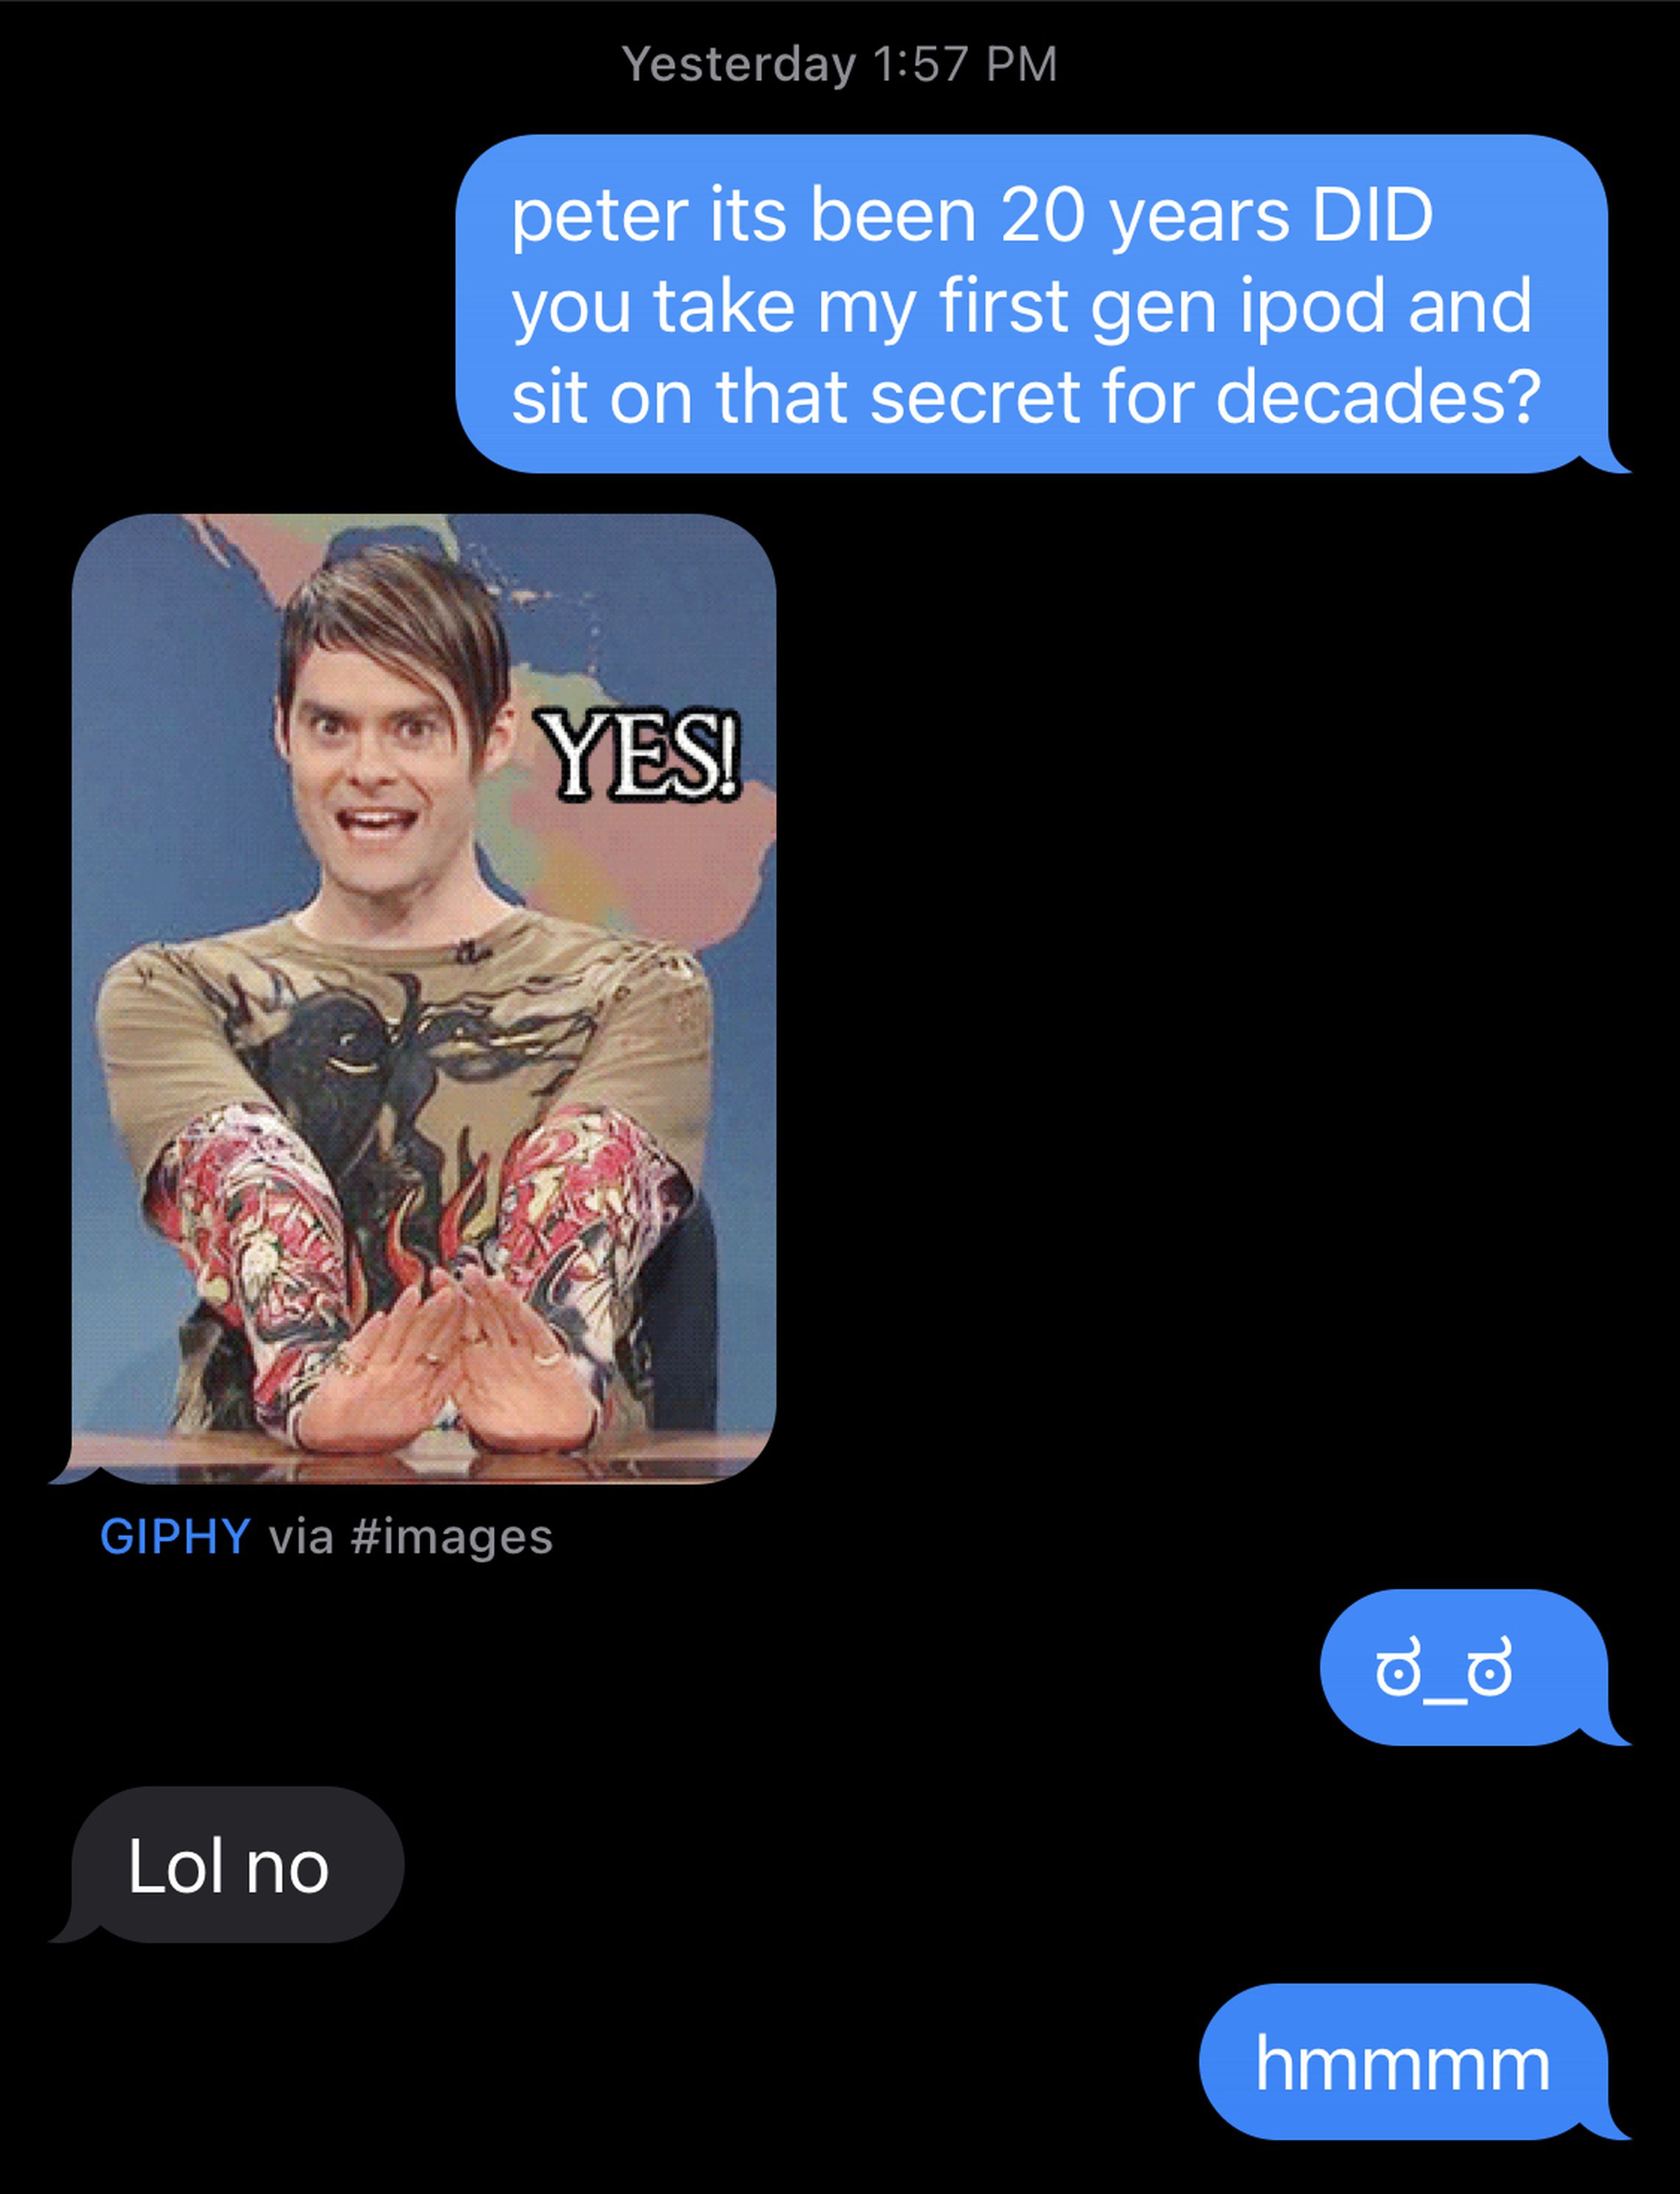 A screenshot of a conversation from iMessage. The sender asks: “Peter, it’s been 20 years, did you take my first gen iPod and sit on that secret for decades?” Peter responds with an SNL gif of Stefon saying “Yes,” then later replies “lol no.”